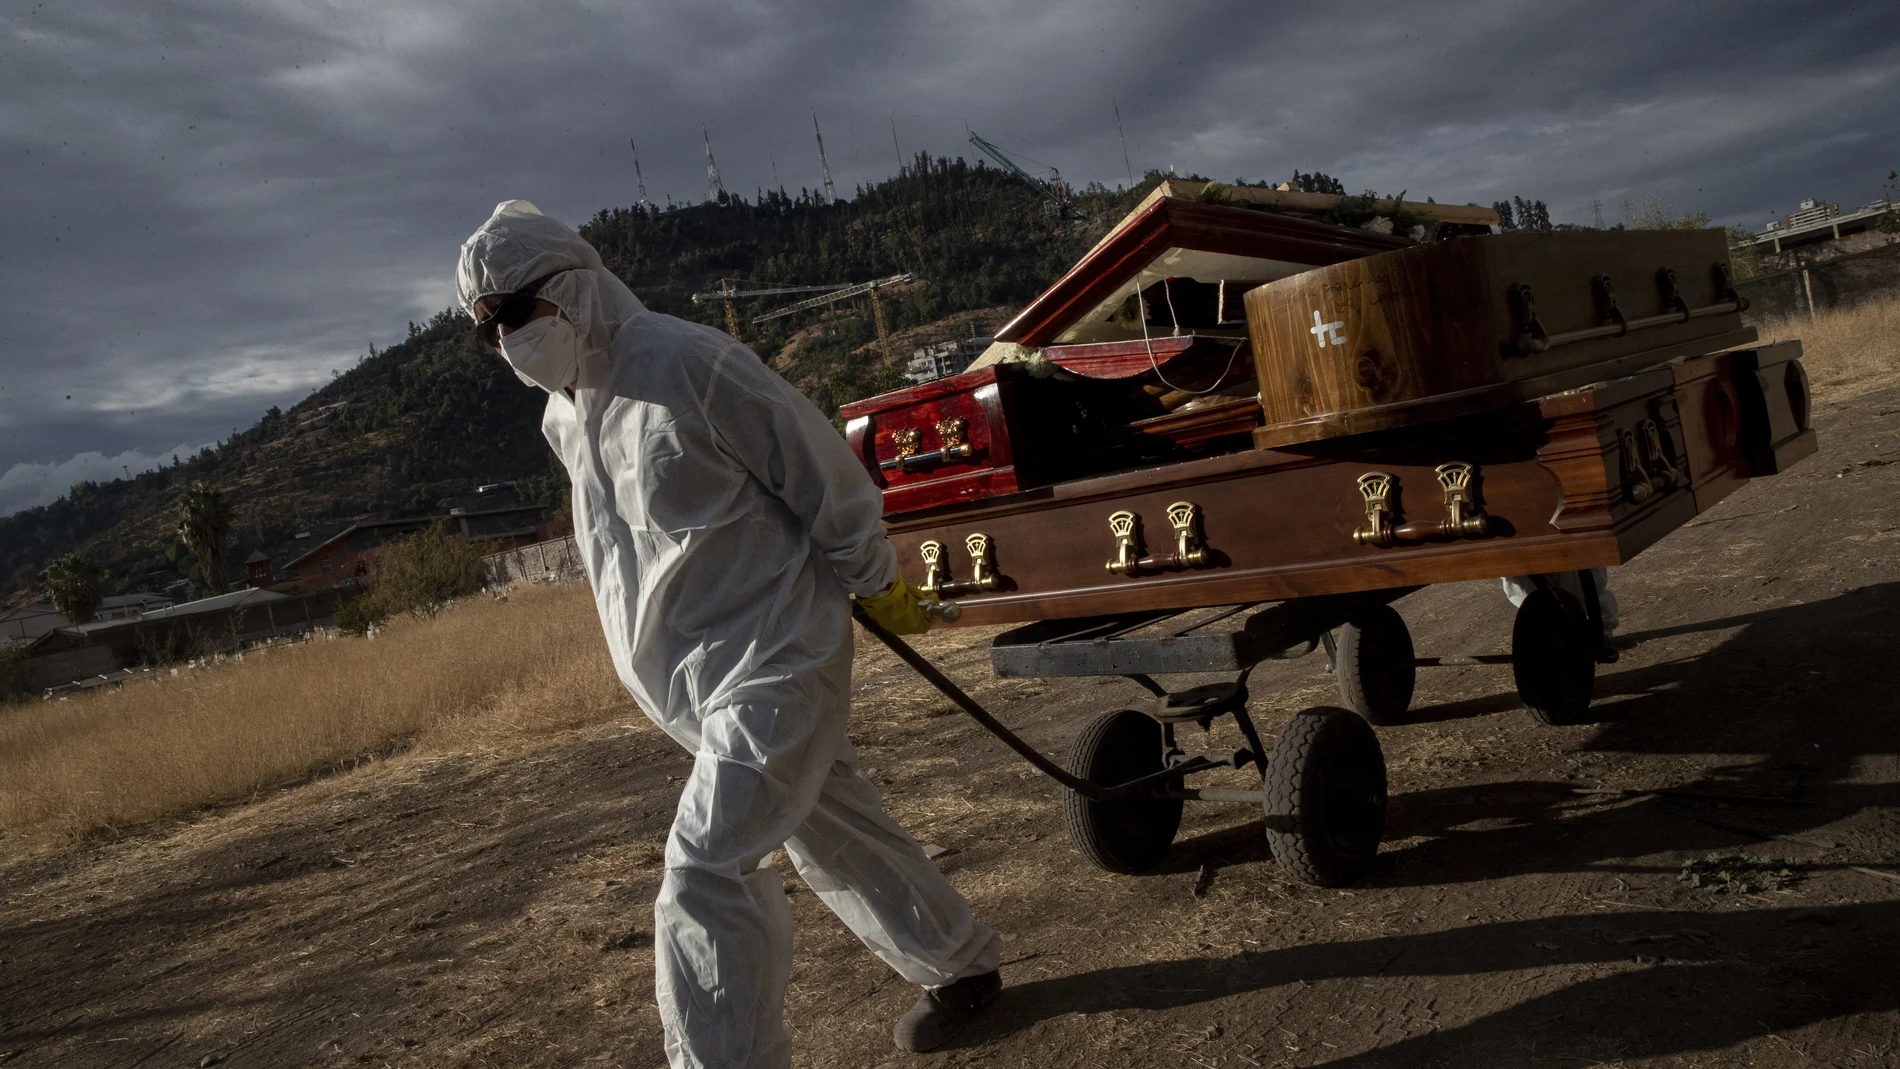 A funeral worker removes empty coffins that held remains that were later cremated at La Recoleta cemetery in Santiago, Chile, during the coronavirus pandemic, on April 21, 2021. (AP Photo/Esteban Felix)